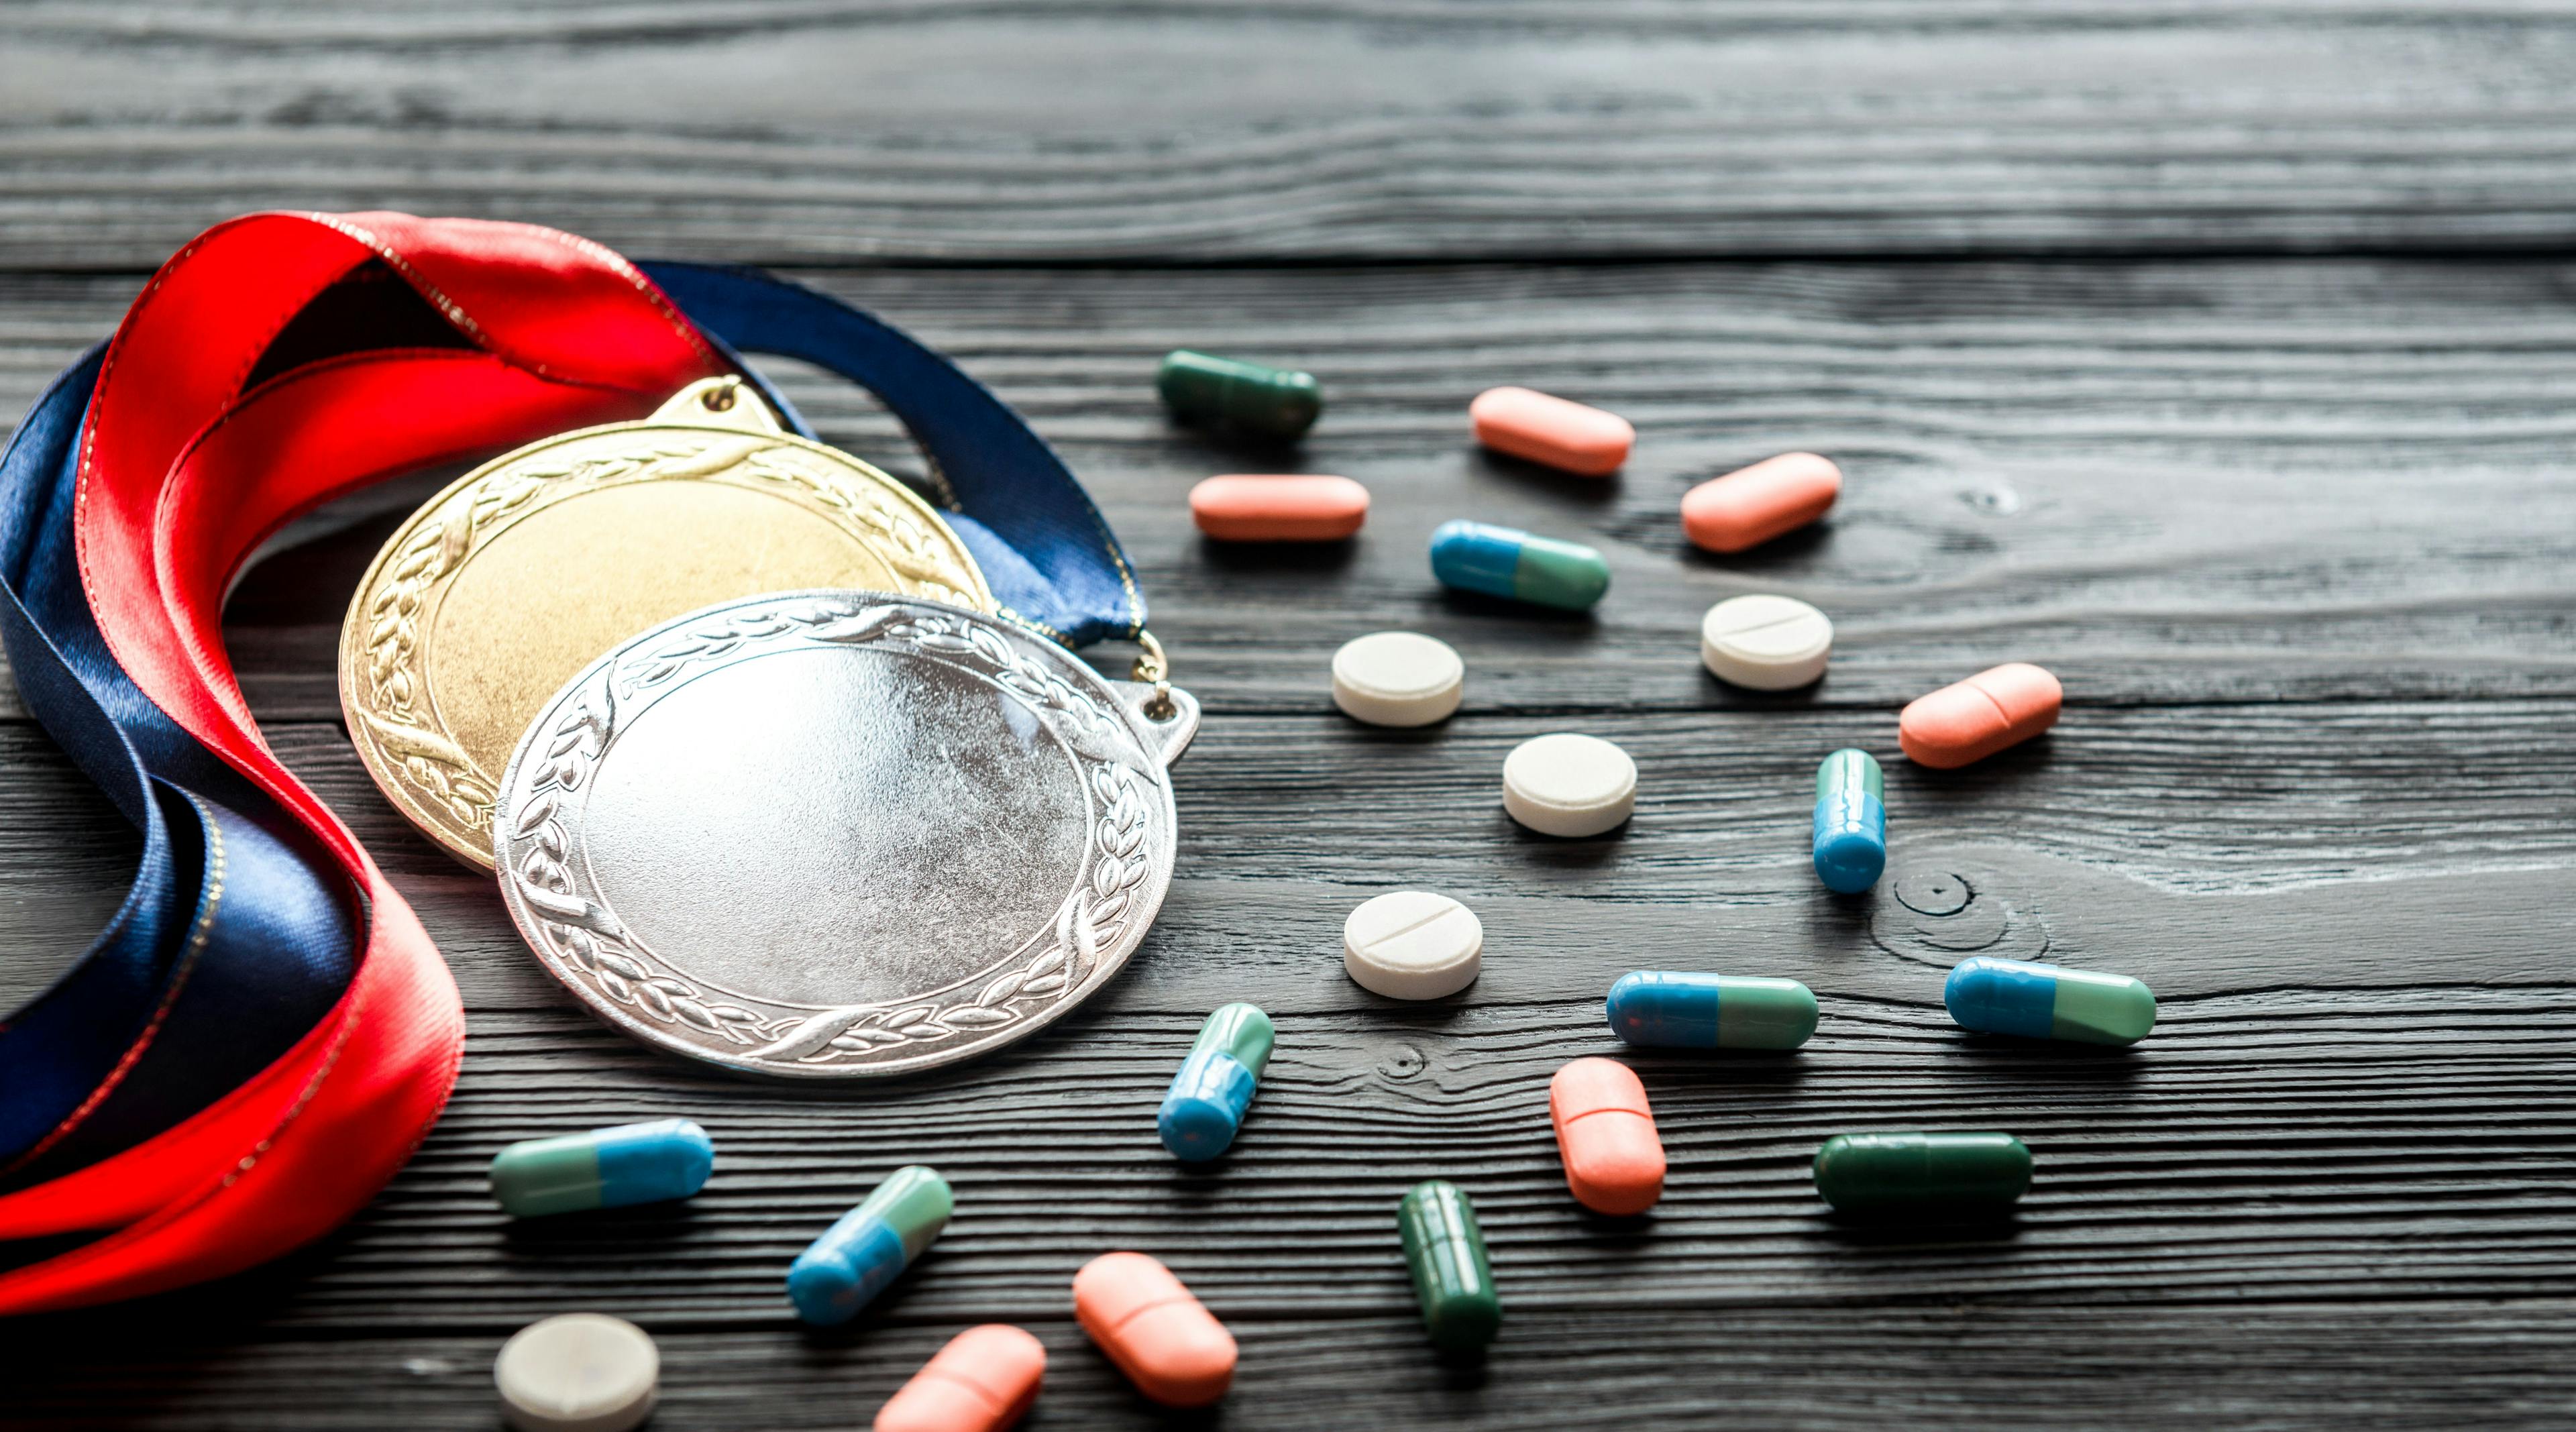 Concept of doping in sport - deprivation medals | Image Credit: © 279photo - stock.adobe.com